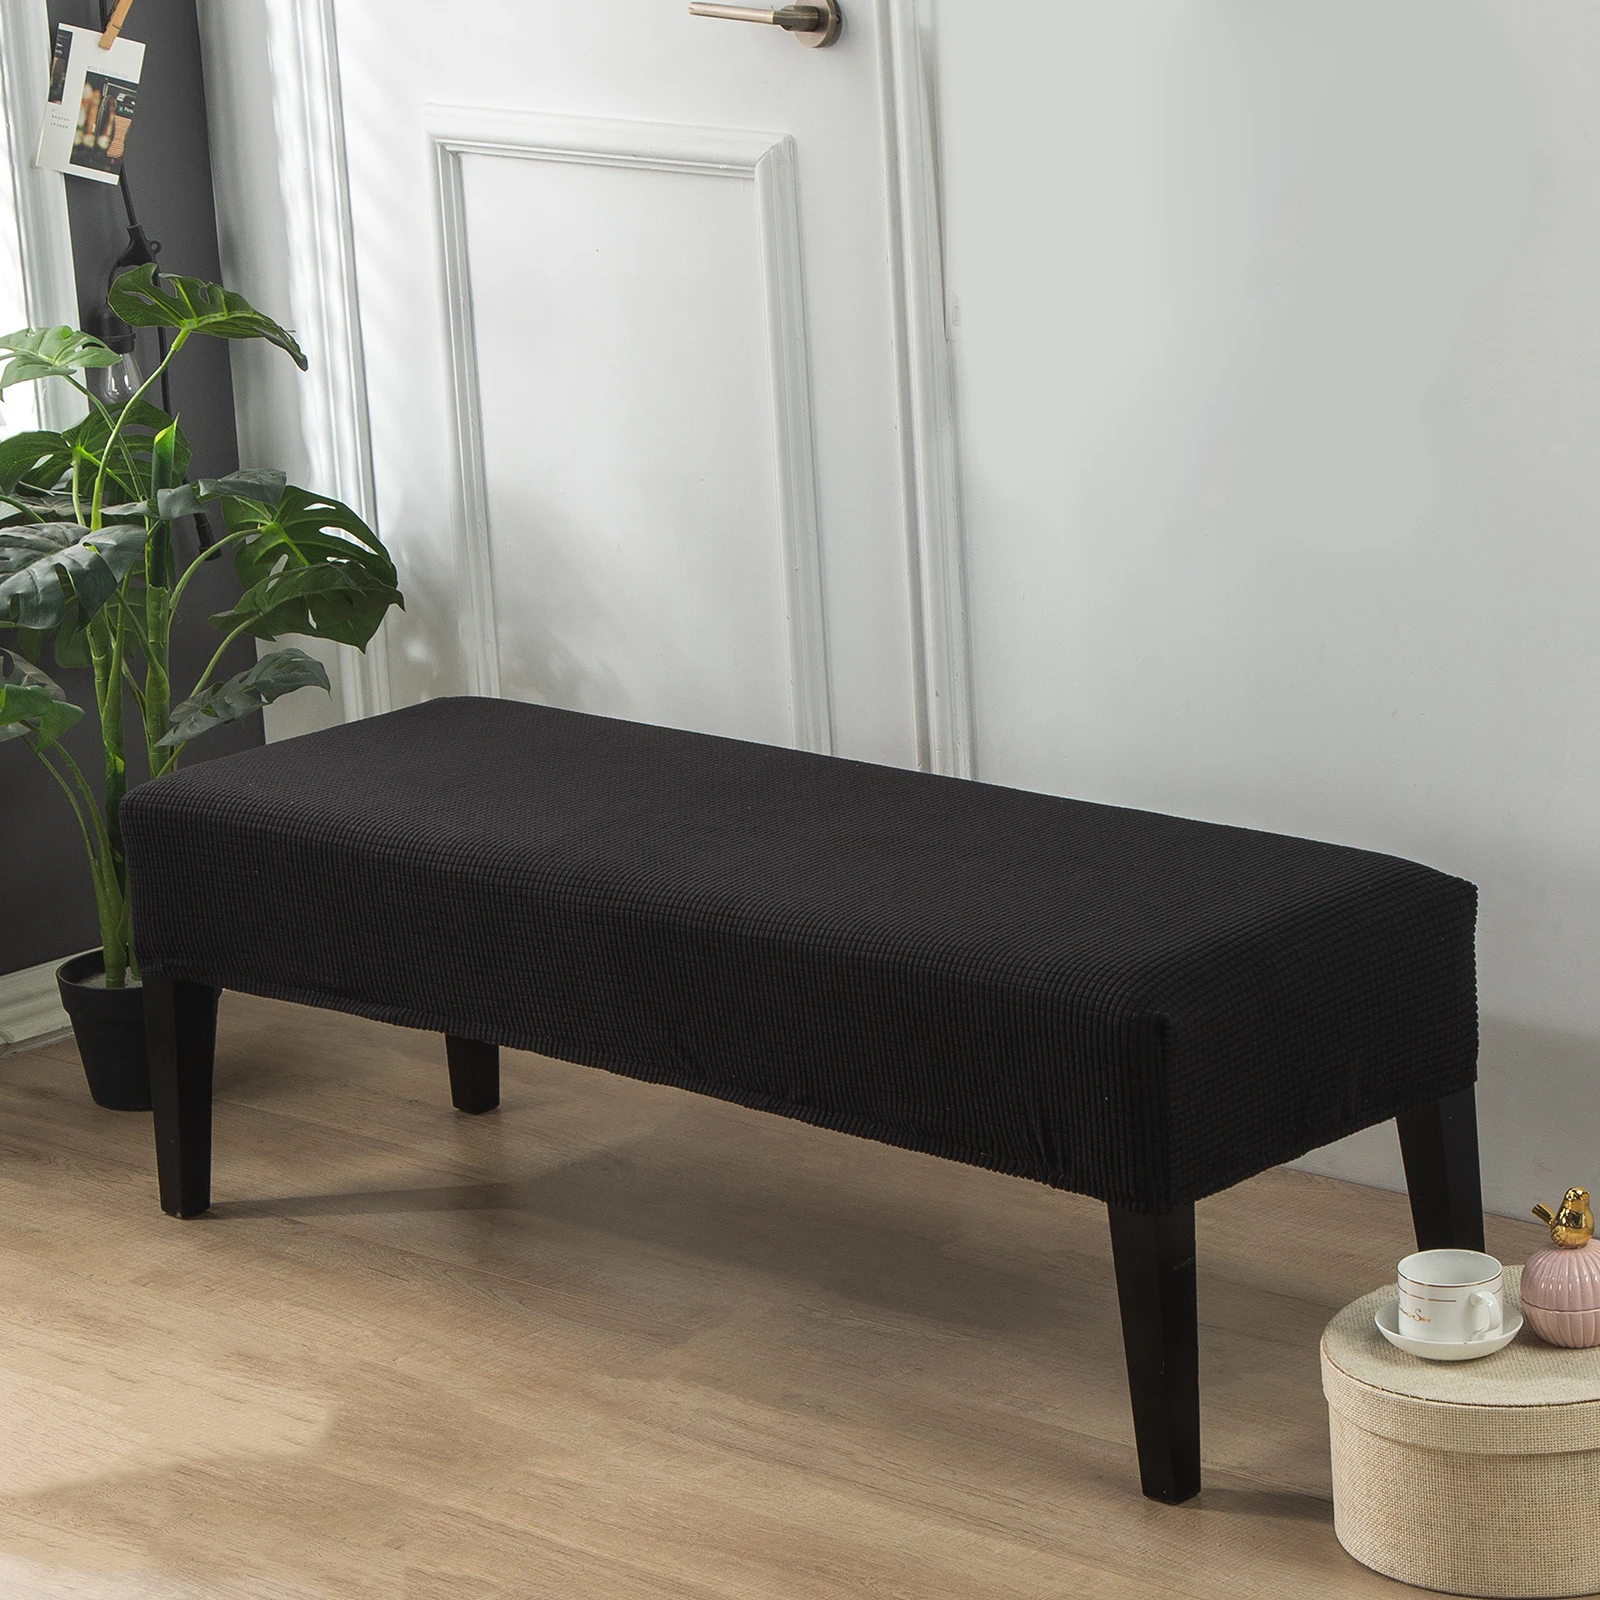 Polyester Jacquard Fabric Bench Cover Bench Slipcover, Easy Install